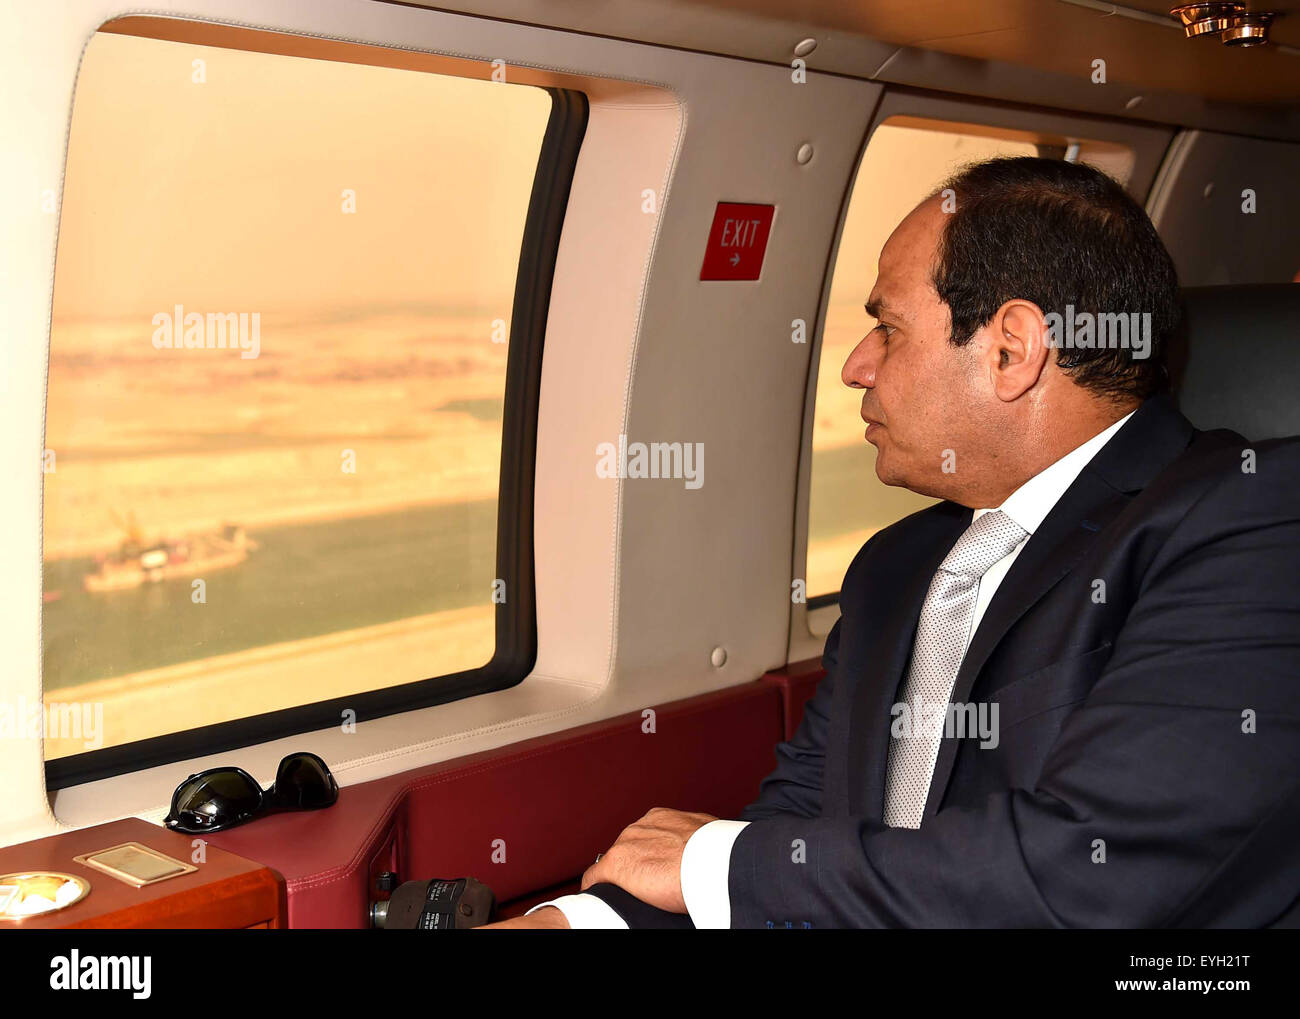 Egyptian President Abdel Fatah Al-Sisi makes an air inspection of the new Suez Canal, nearing completion after 1 year of work. Stock Photo